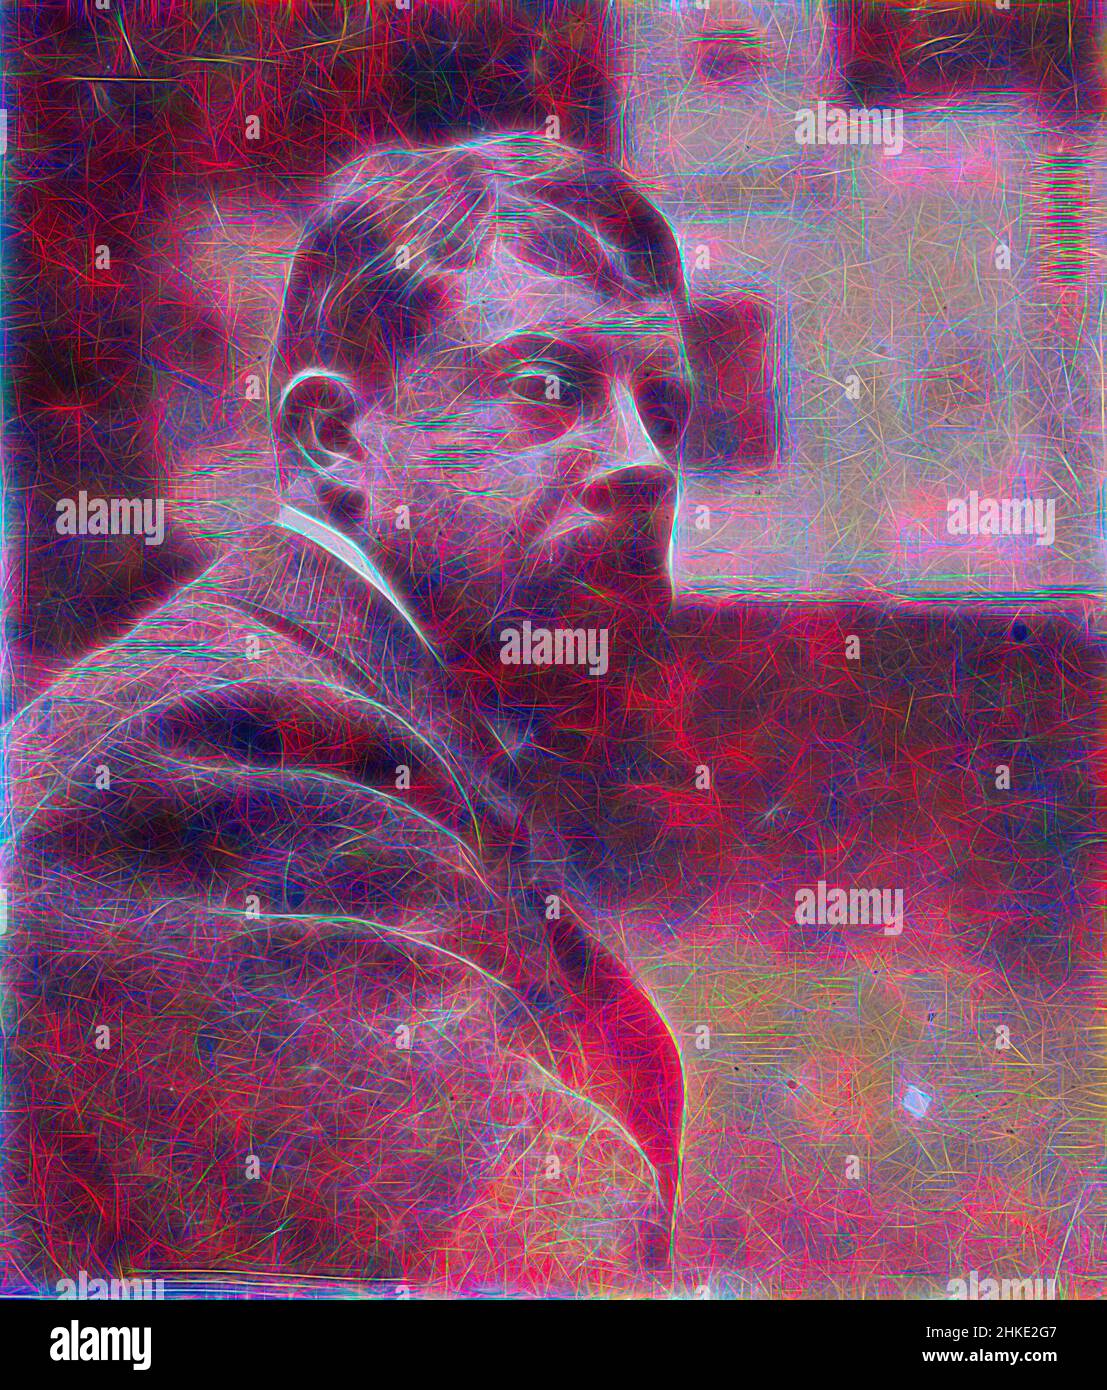 Inspired by Self-portrait of George Hendrik Breitner, George Hendrik Breitner, Amsterdam, c. 1901 - c. 1902, height 90 mm × width 79 mm, Reimagined by Artotop. Classic art reinvented with a modern twist. Design of warm cheerful glowing of brightness and light ray radiance. Photography inspired by surrealism and futurism, embracing dynamic energy of modern technology, movement, speed and revolutionize culture Stock Photo